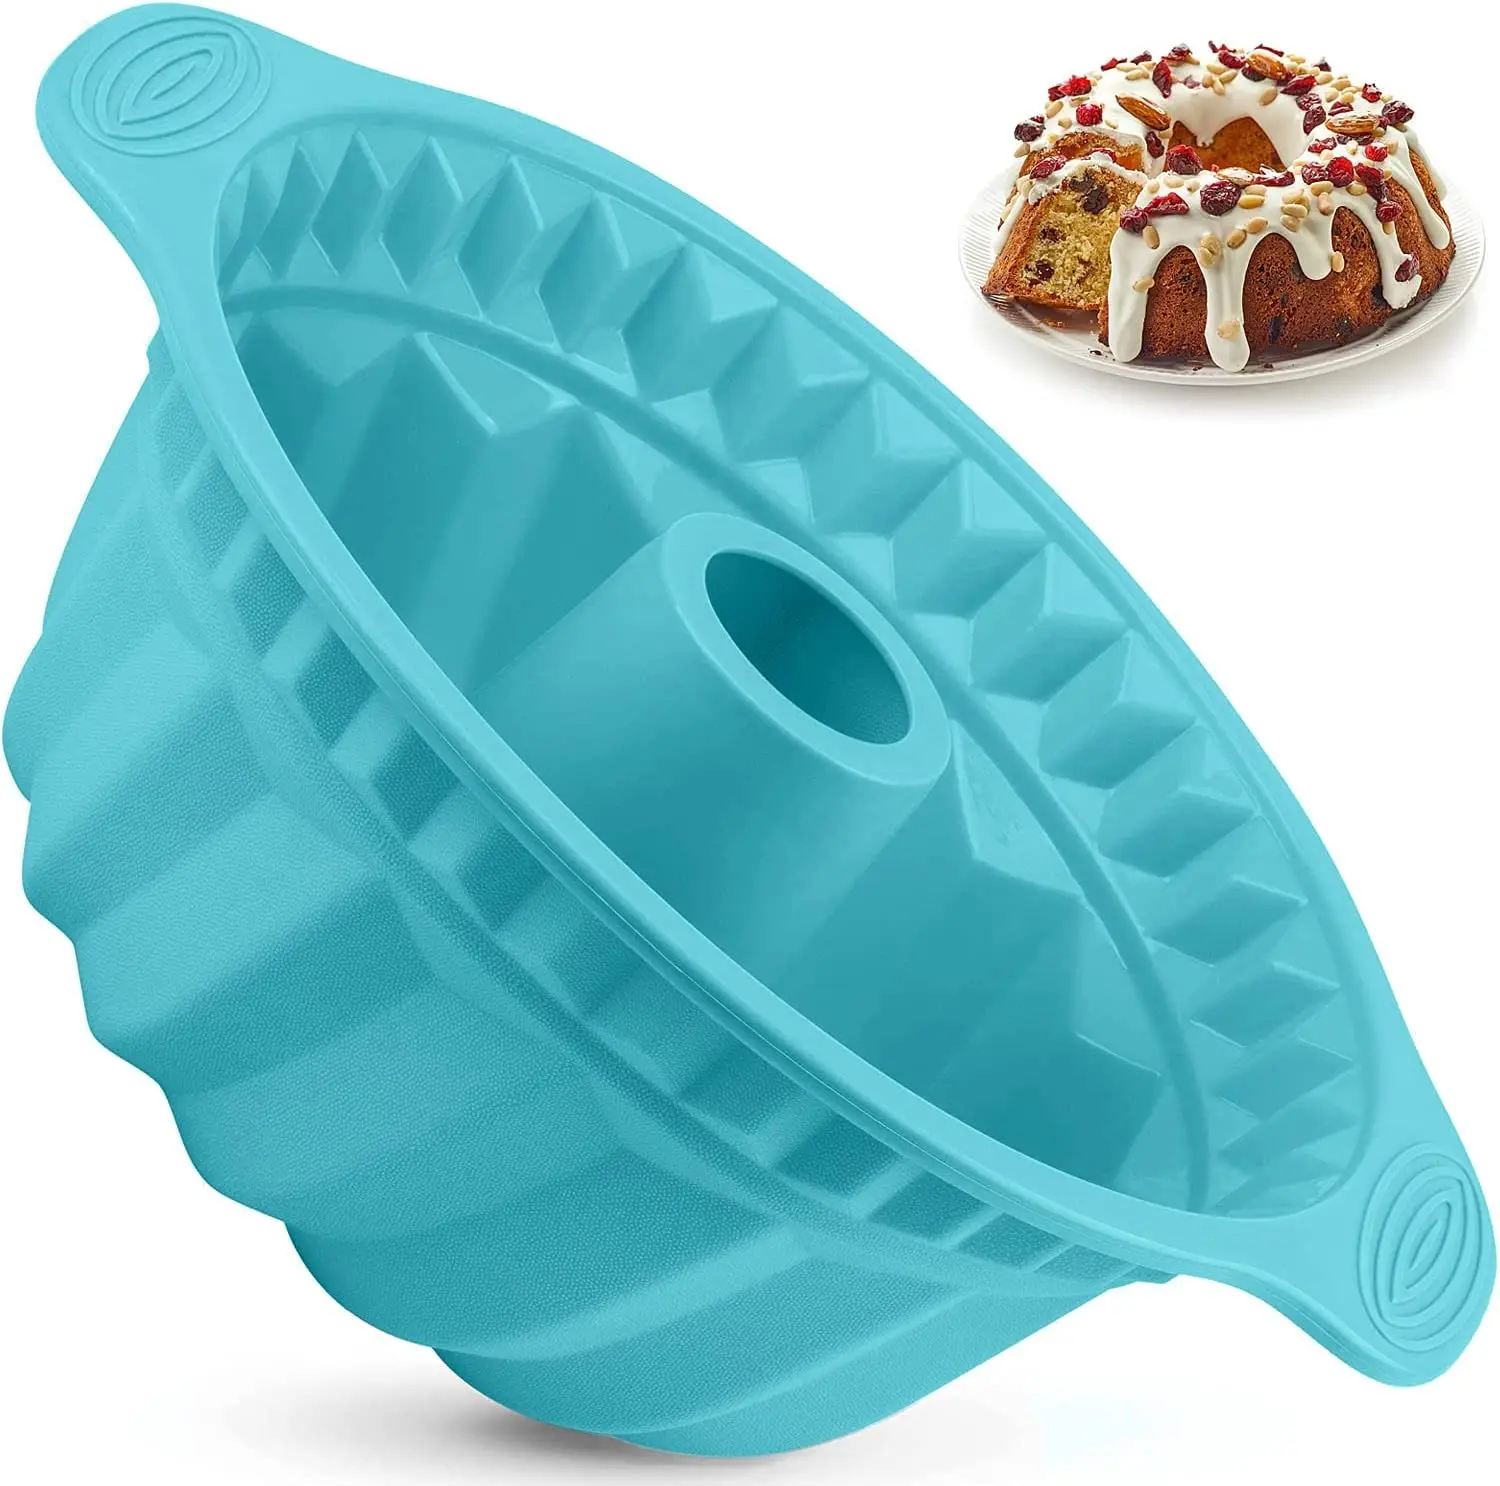 USSE Customized Cake Pan, Silicone Cake Pans Non-stick Fluted with Sturdy Handle Cake Baking Molds